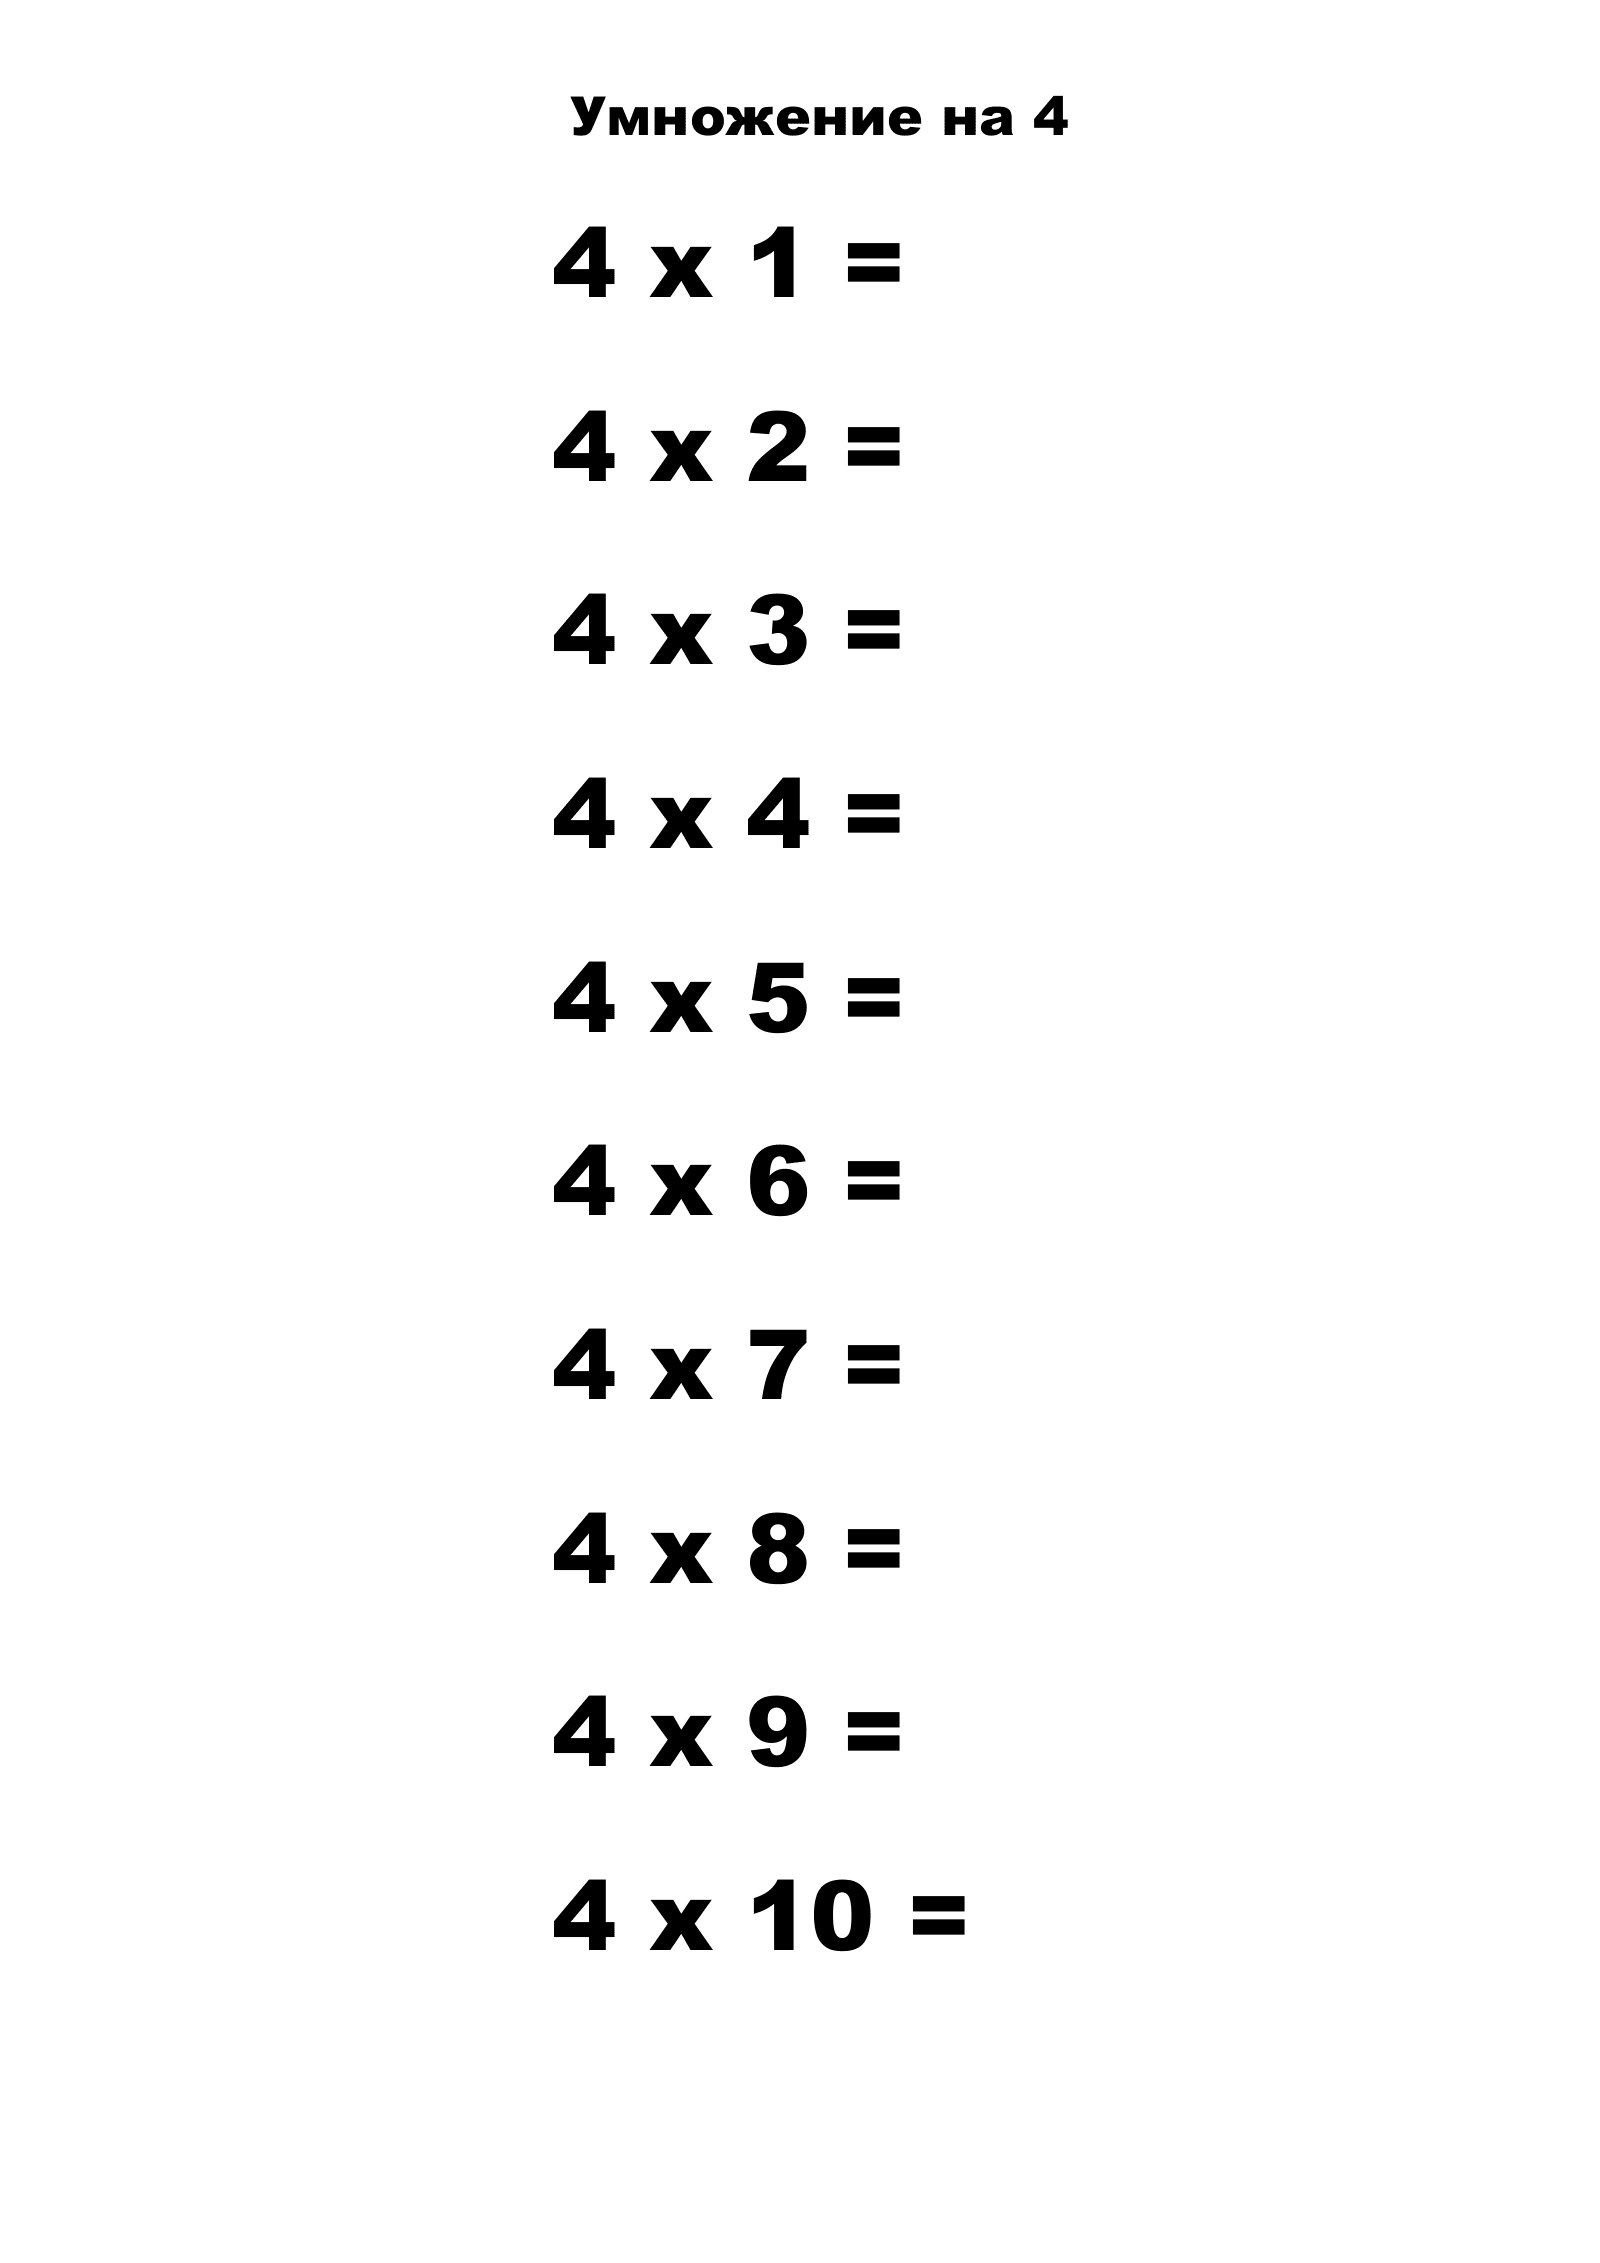 Multiplication Table for 4 Without Answers. Print